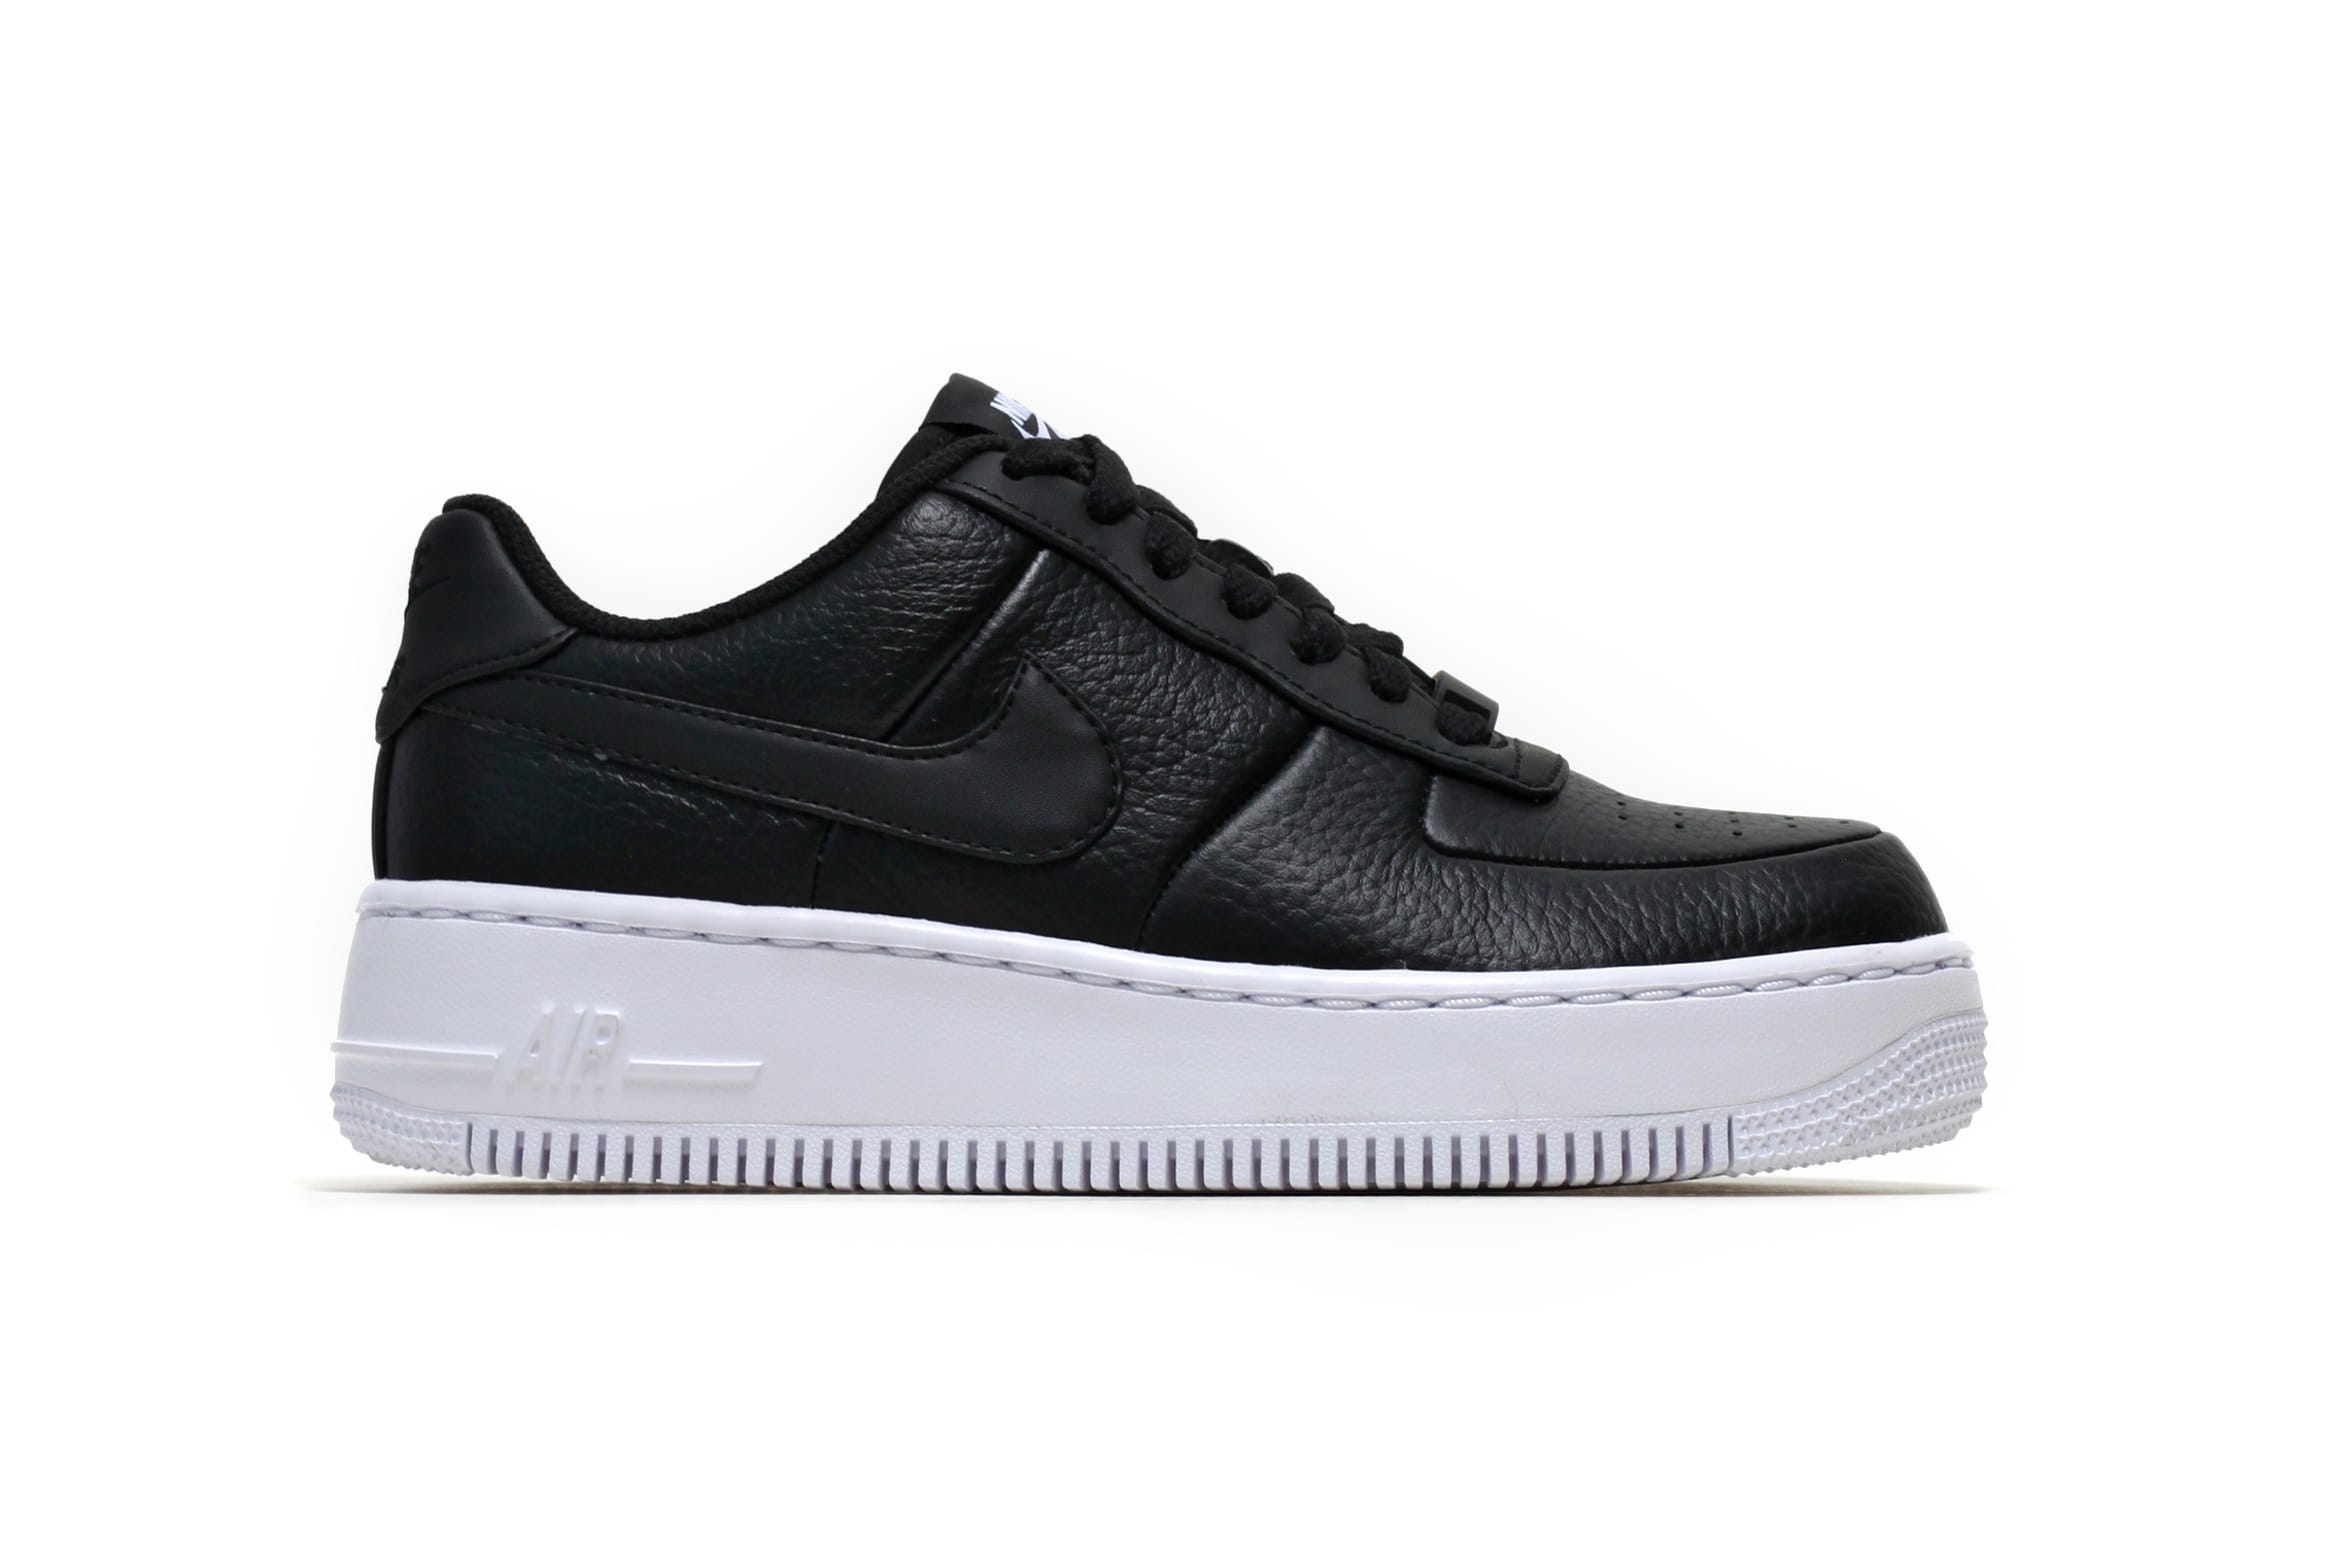 The Nike Air Force 1 Upstep in Black Is 